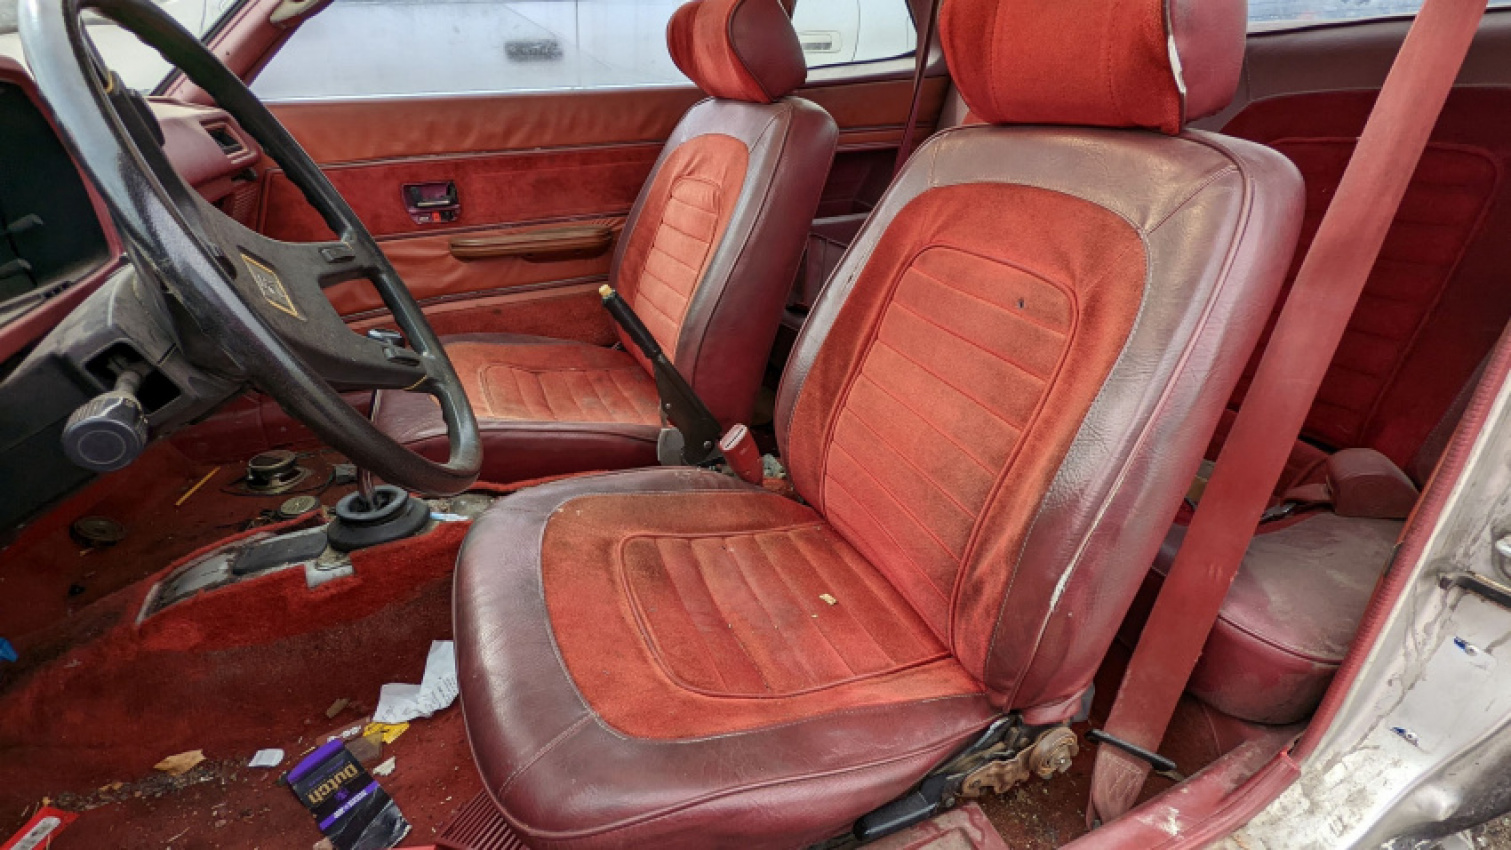 autos, car life, cars, classic cars, dell, honda, this 1981 honda prelude will bring its bordello red interior to the crusher